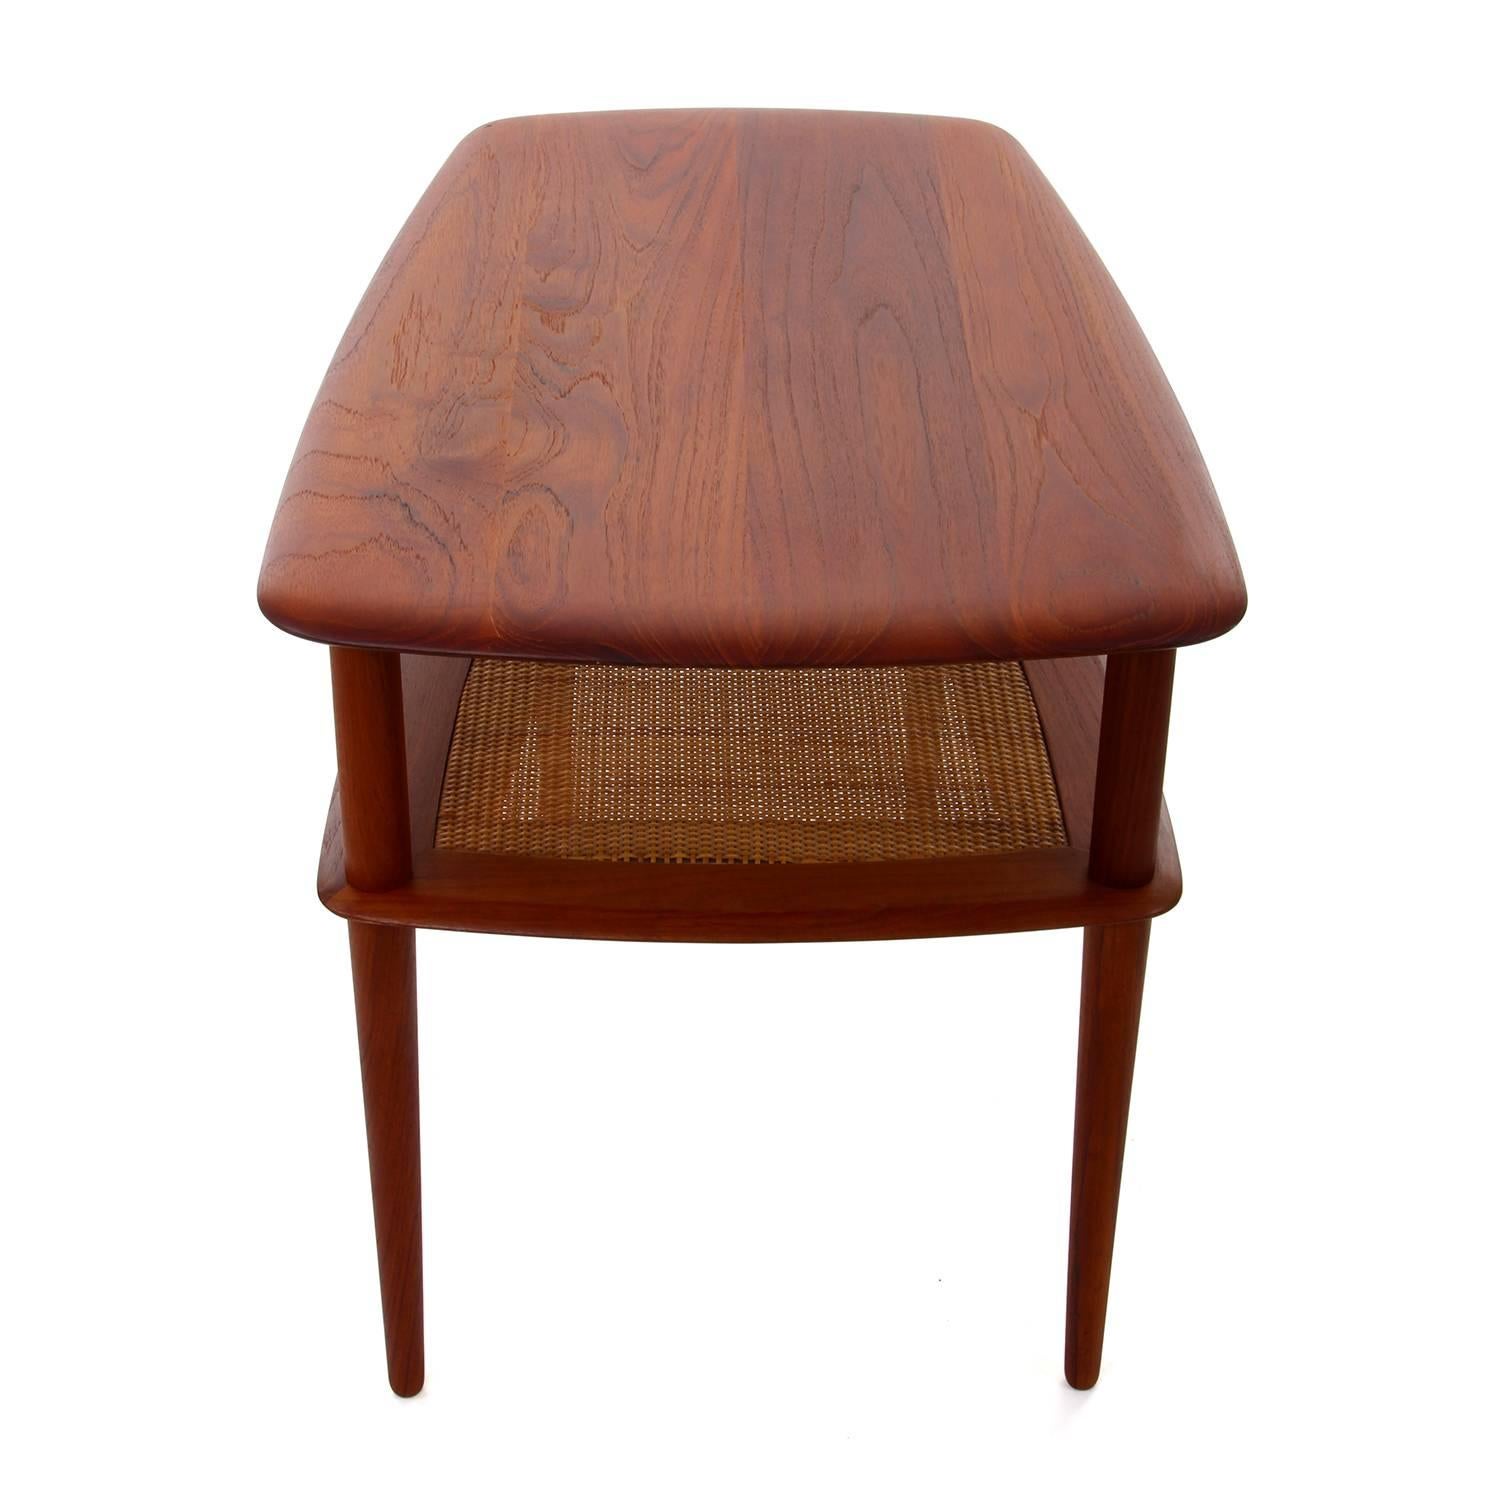 FD 518 - teak lamp table by Hvidt & Mølgaard for France & Son in 1956 - gorgeous Minimalist teak side table or lamp table with cane shelf in very good vintage condition!

A striking example of Danish midcentury design - the trapezoidal shaped teak